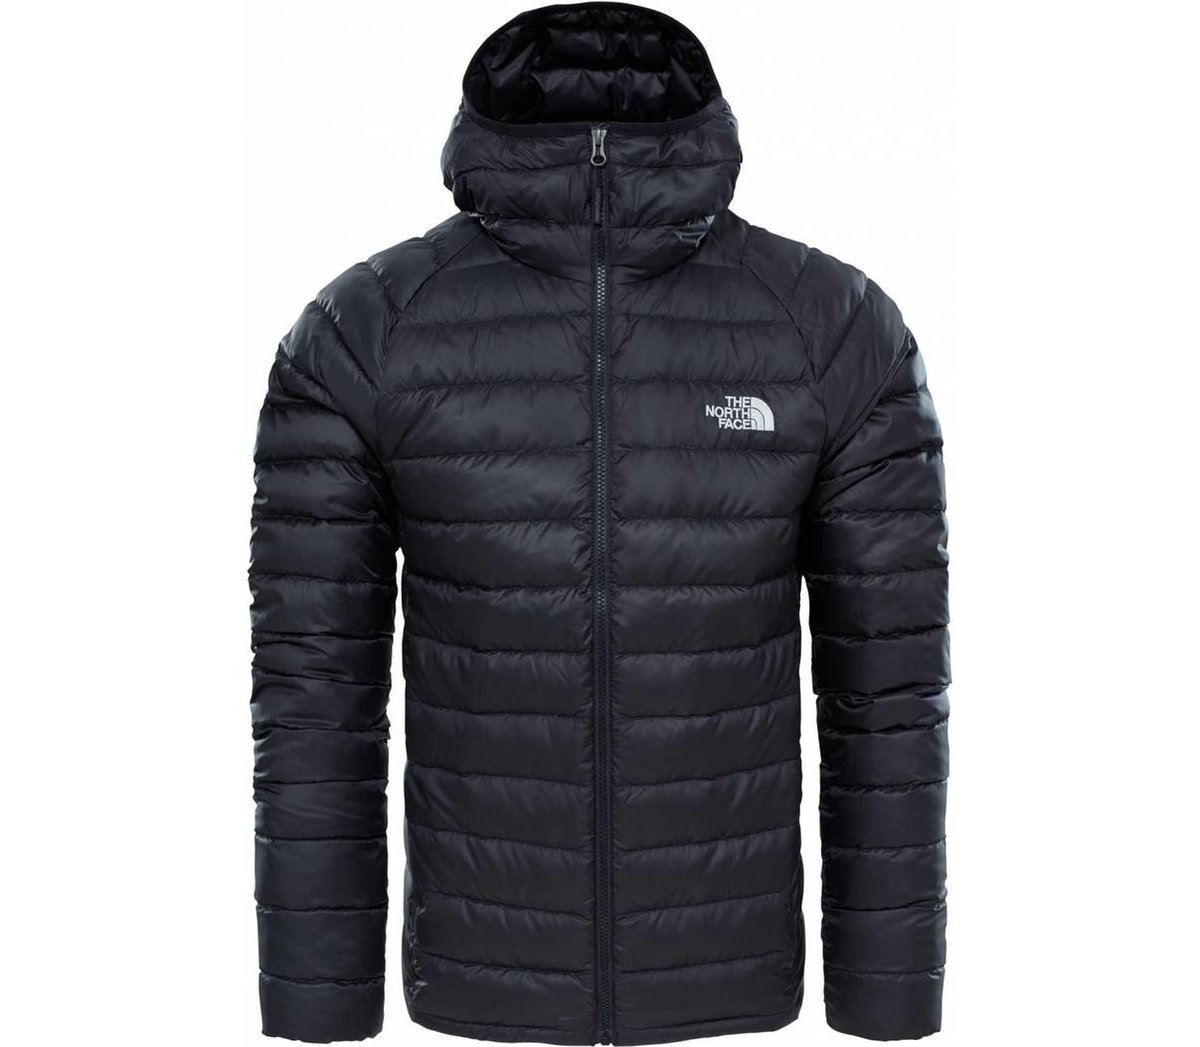 M TREVAIL HOODIE TNF BLK TNF BLK - The North Face